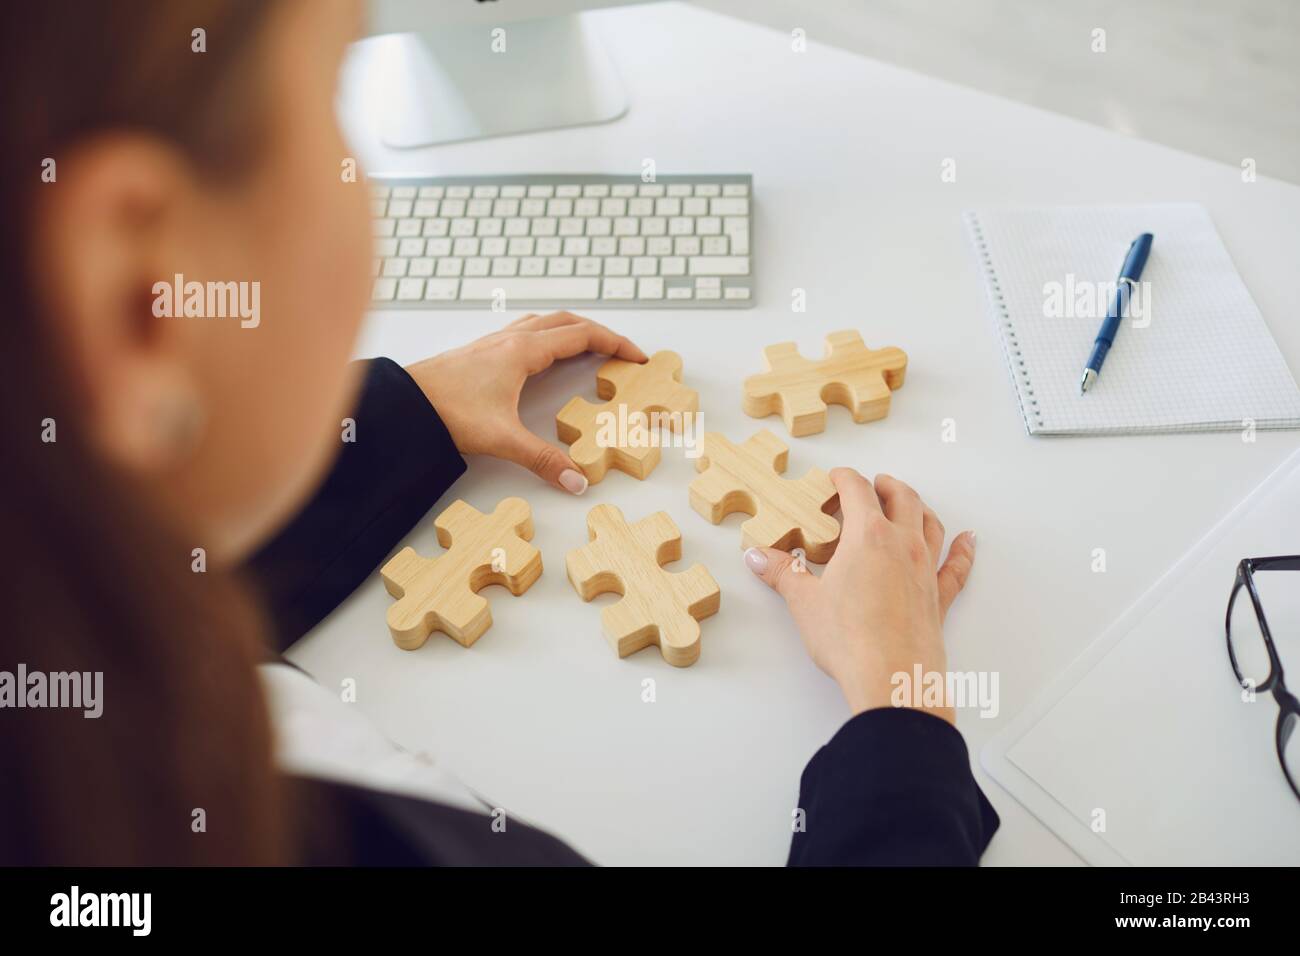 Faceless Hands Of A Businesswoman With Wooden Puzzles On A White